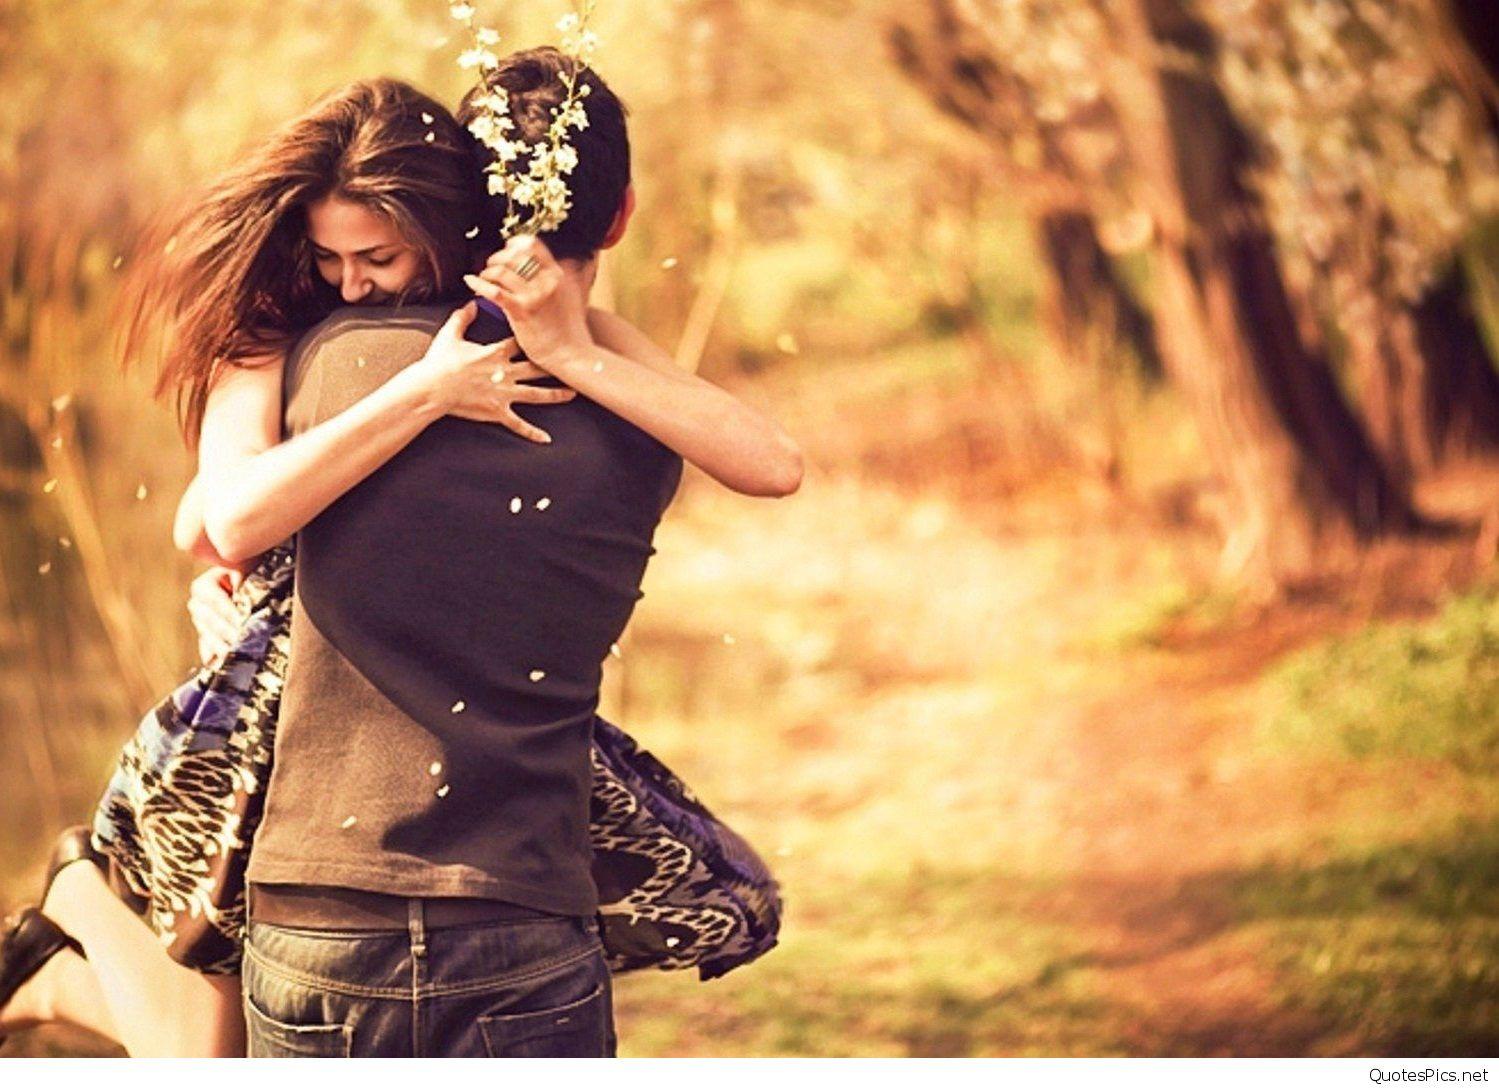 Love Cute Couple Pic Wallpapers